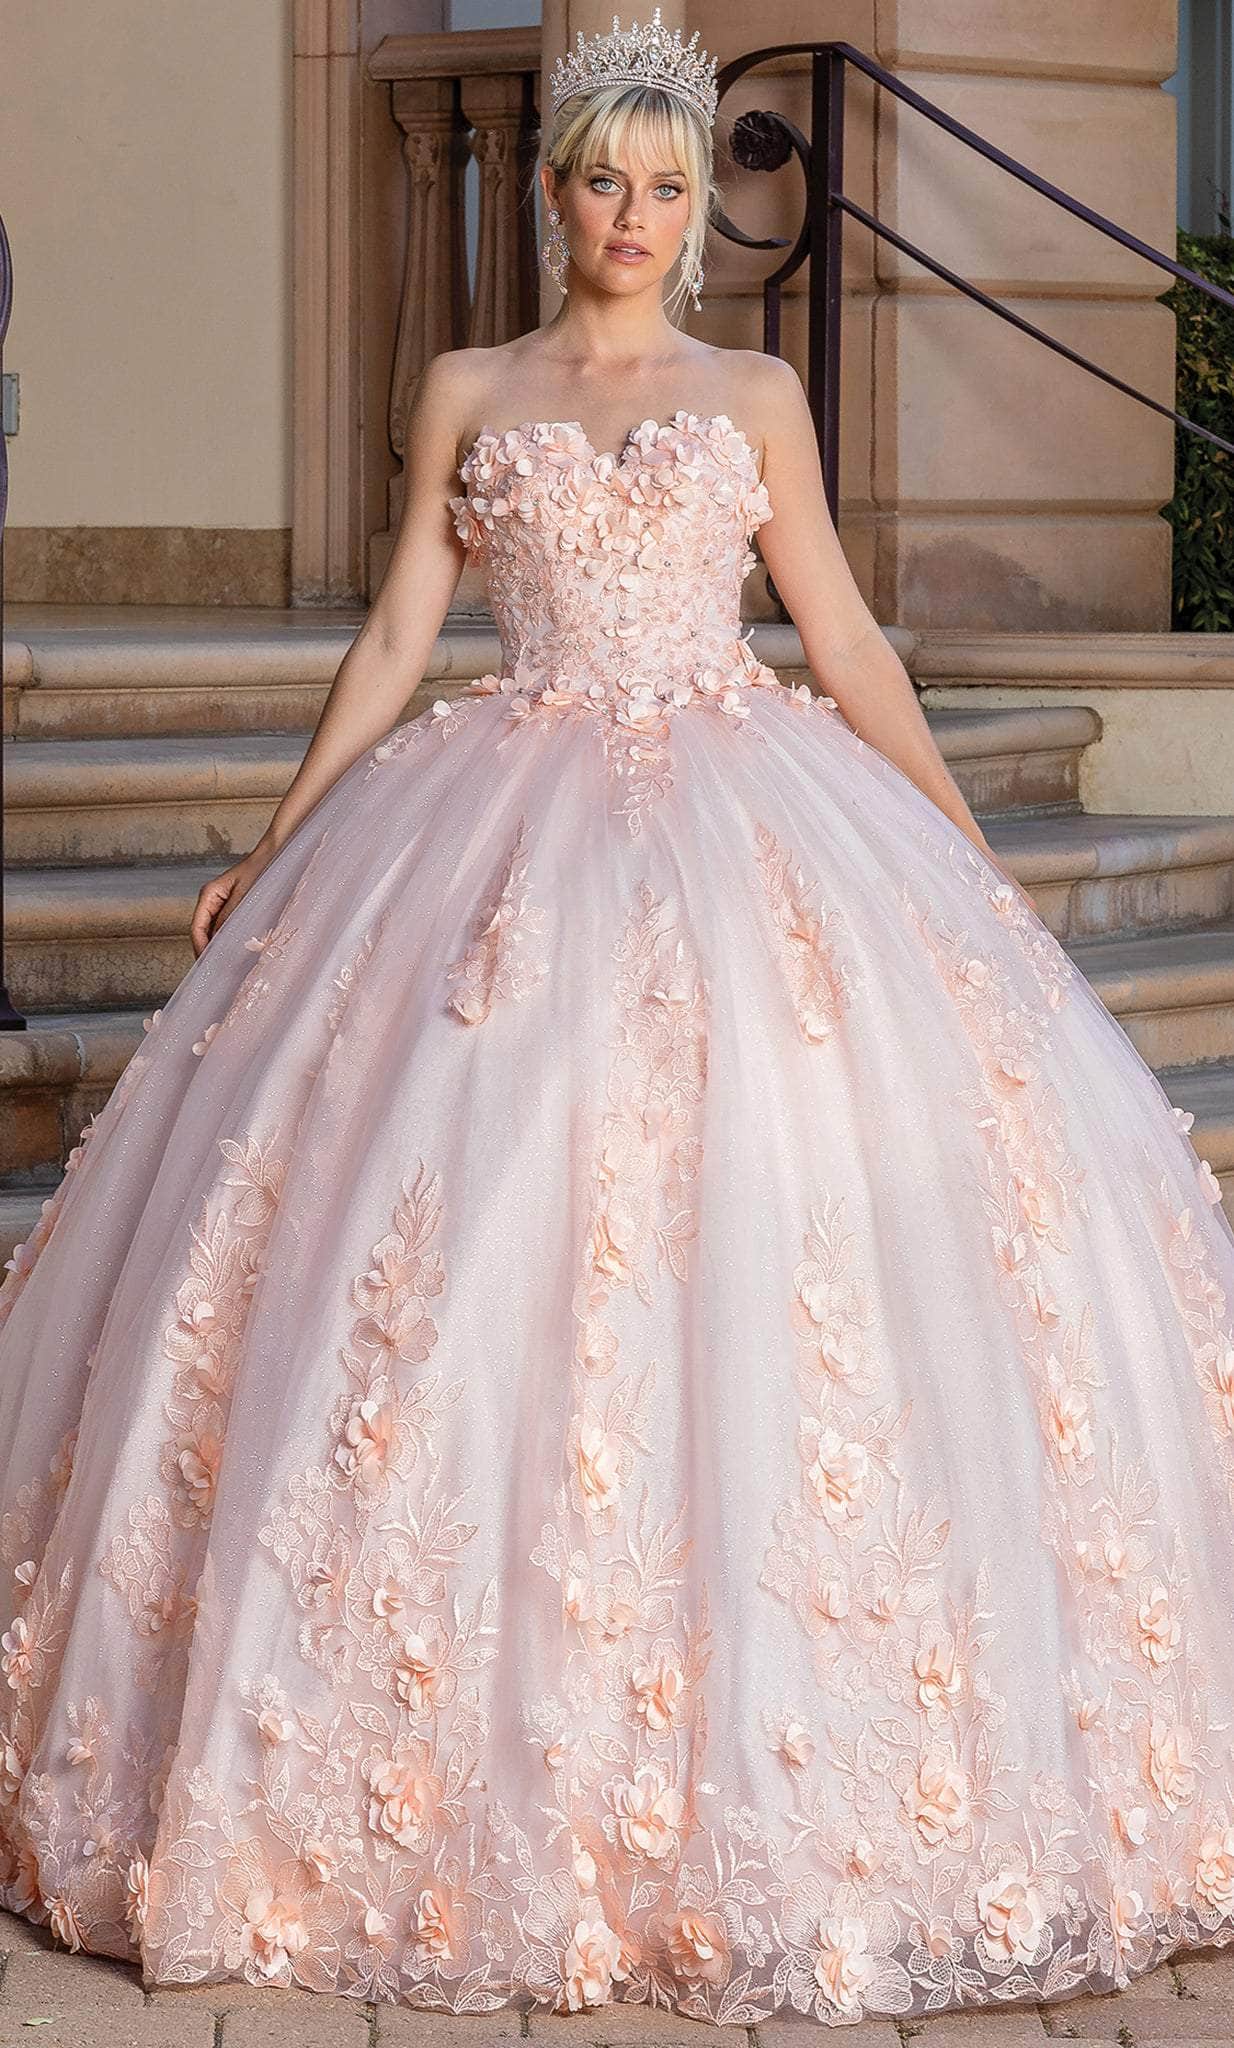 Image of Dancing Queen 1705 - Strapless Embroidered Ballgown